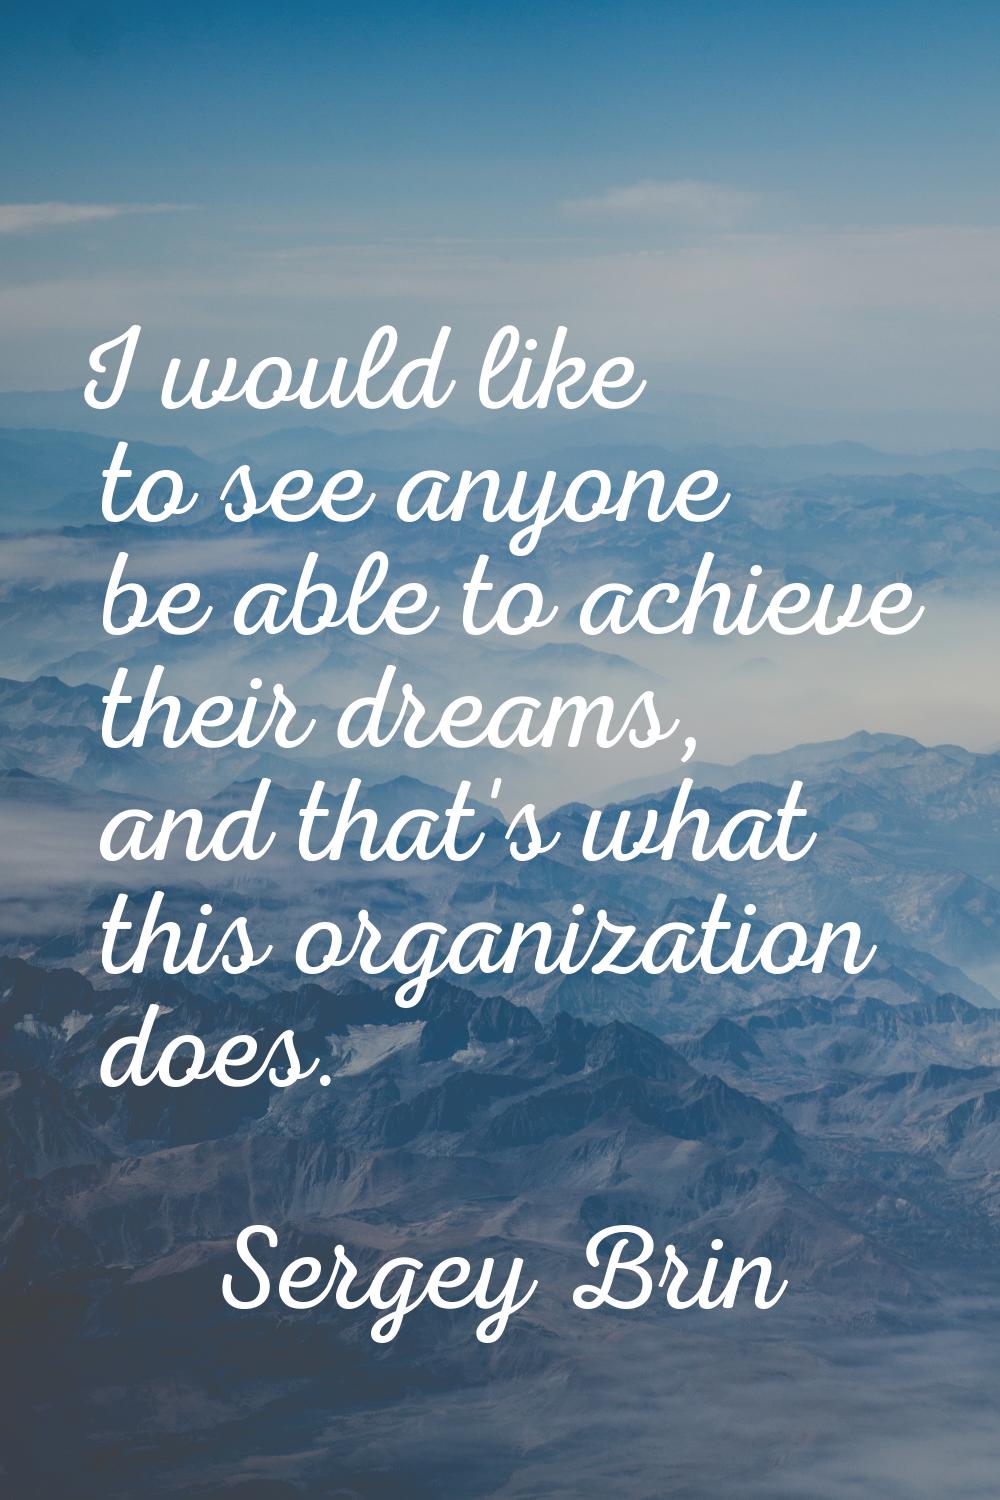 I would like to see anyone be able to achieve their dreams, and that's what this organization does.